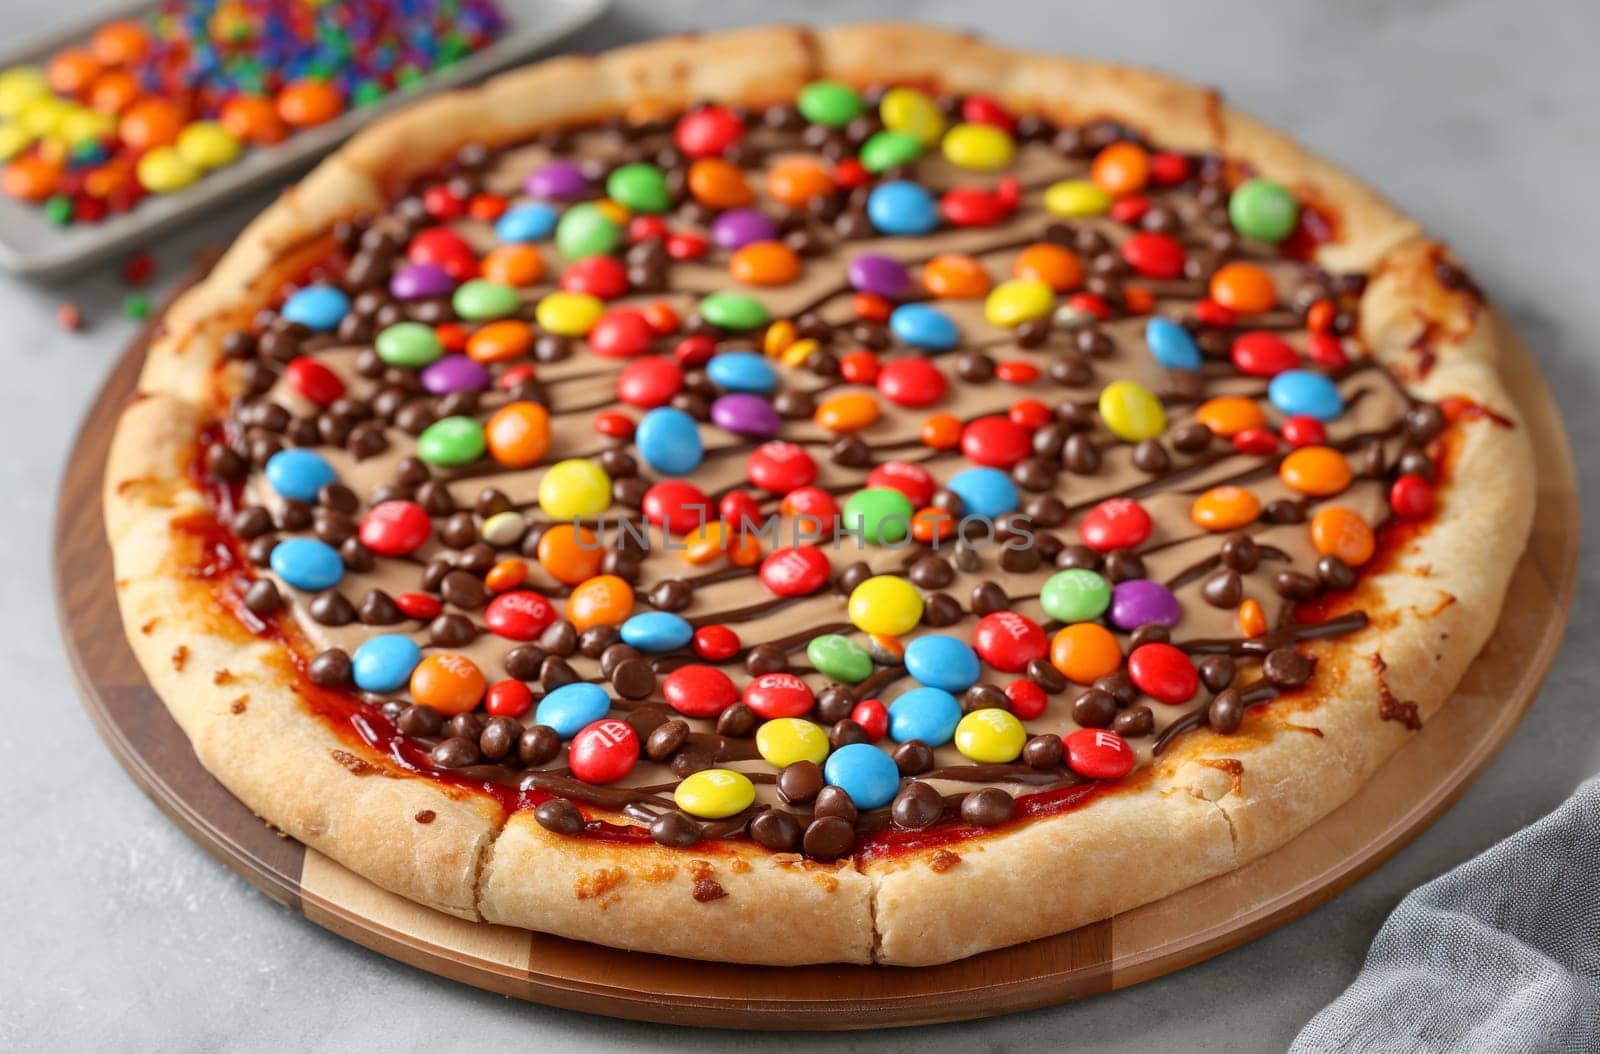 Pizza with golden crust, covered with a layer of chocolate sauce, with lots of colorful candies and chocolate chips